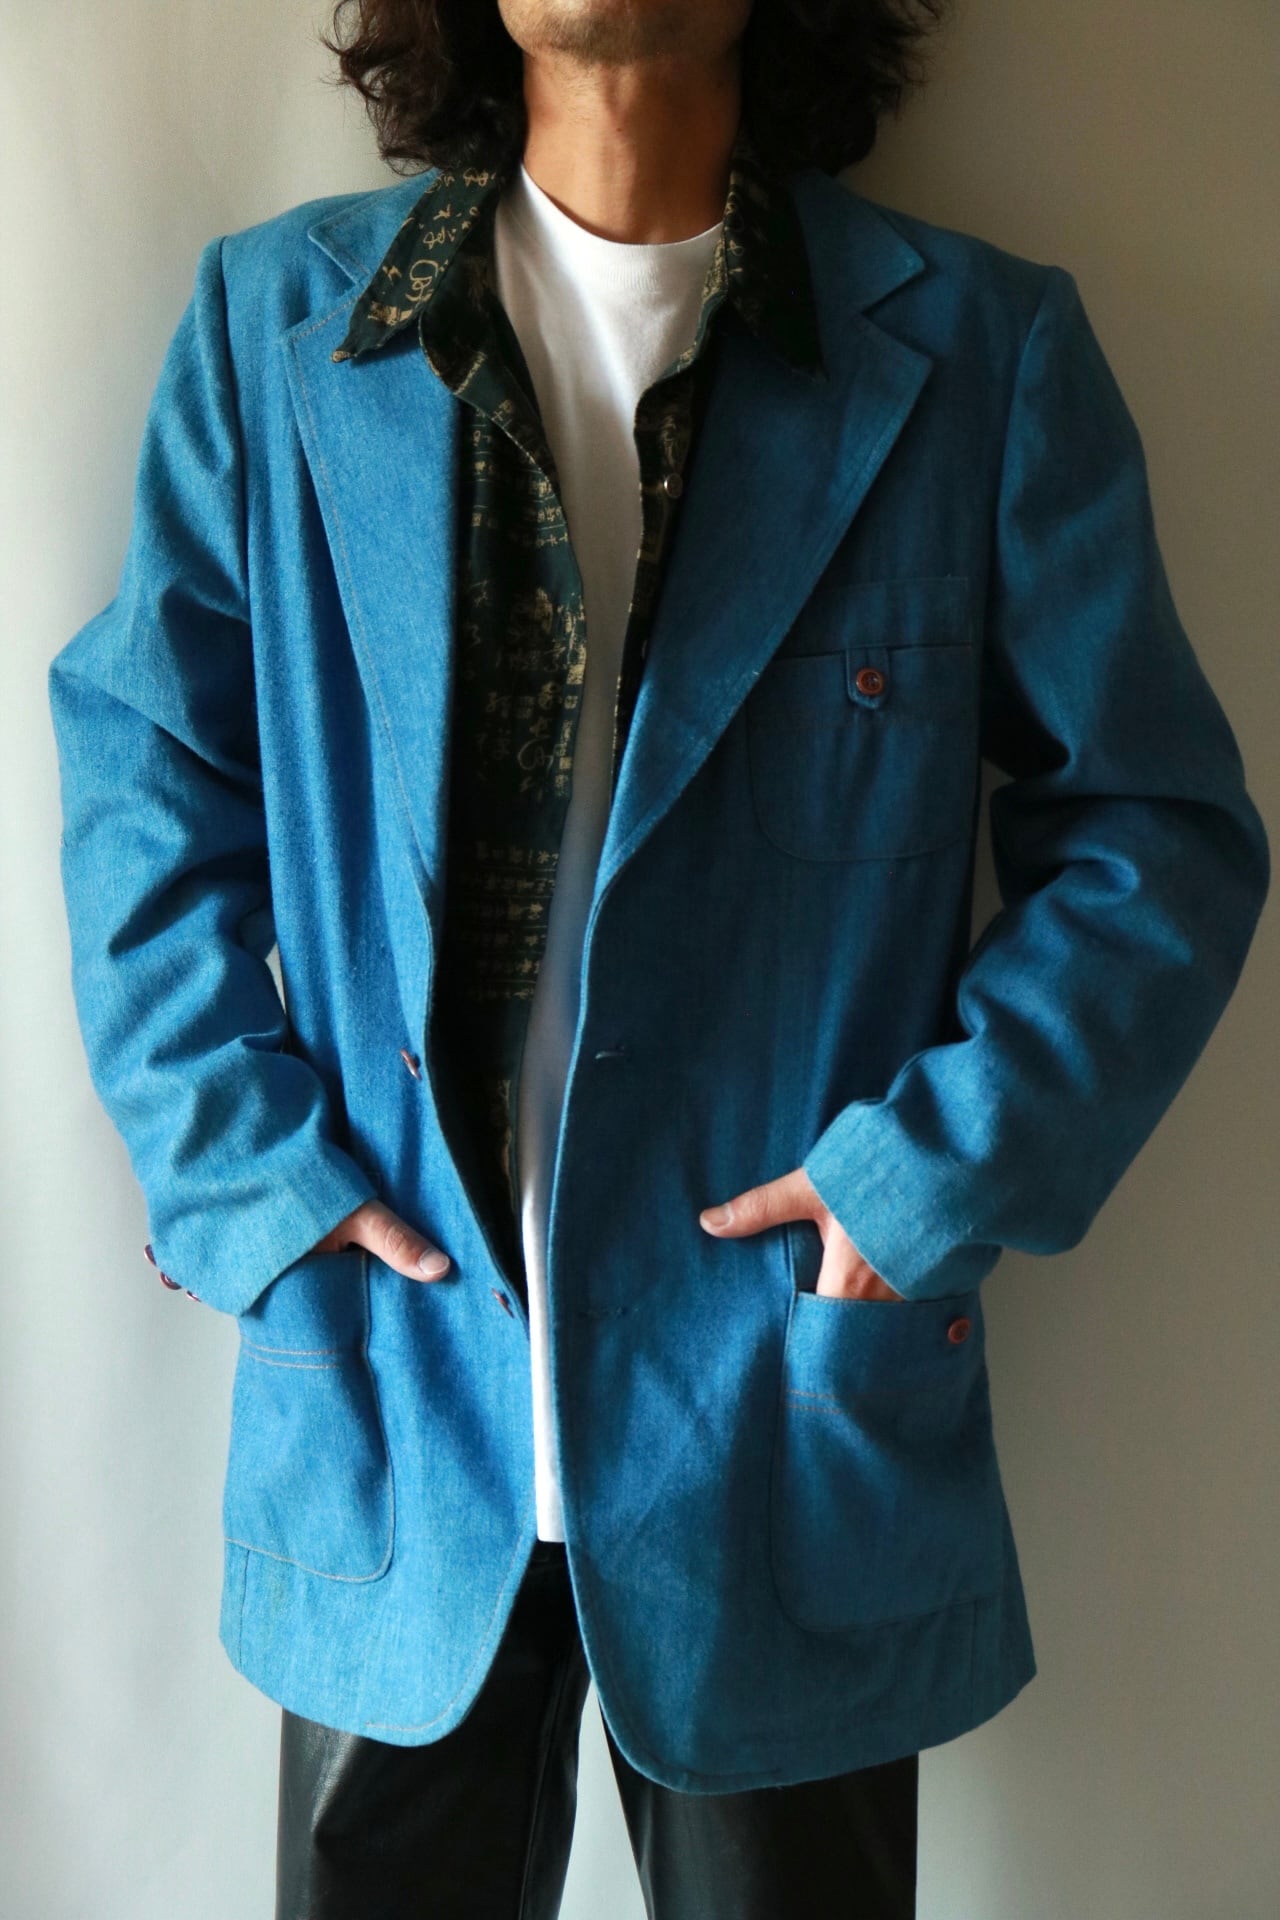 Vintage 70s blue tailored jacket | Cary powered by BASE